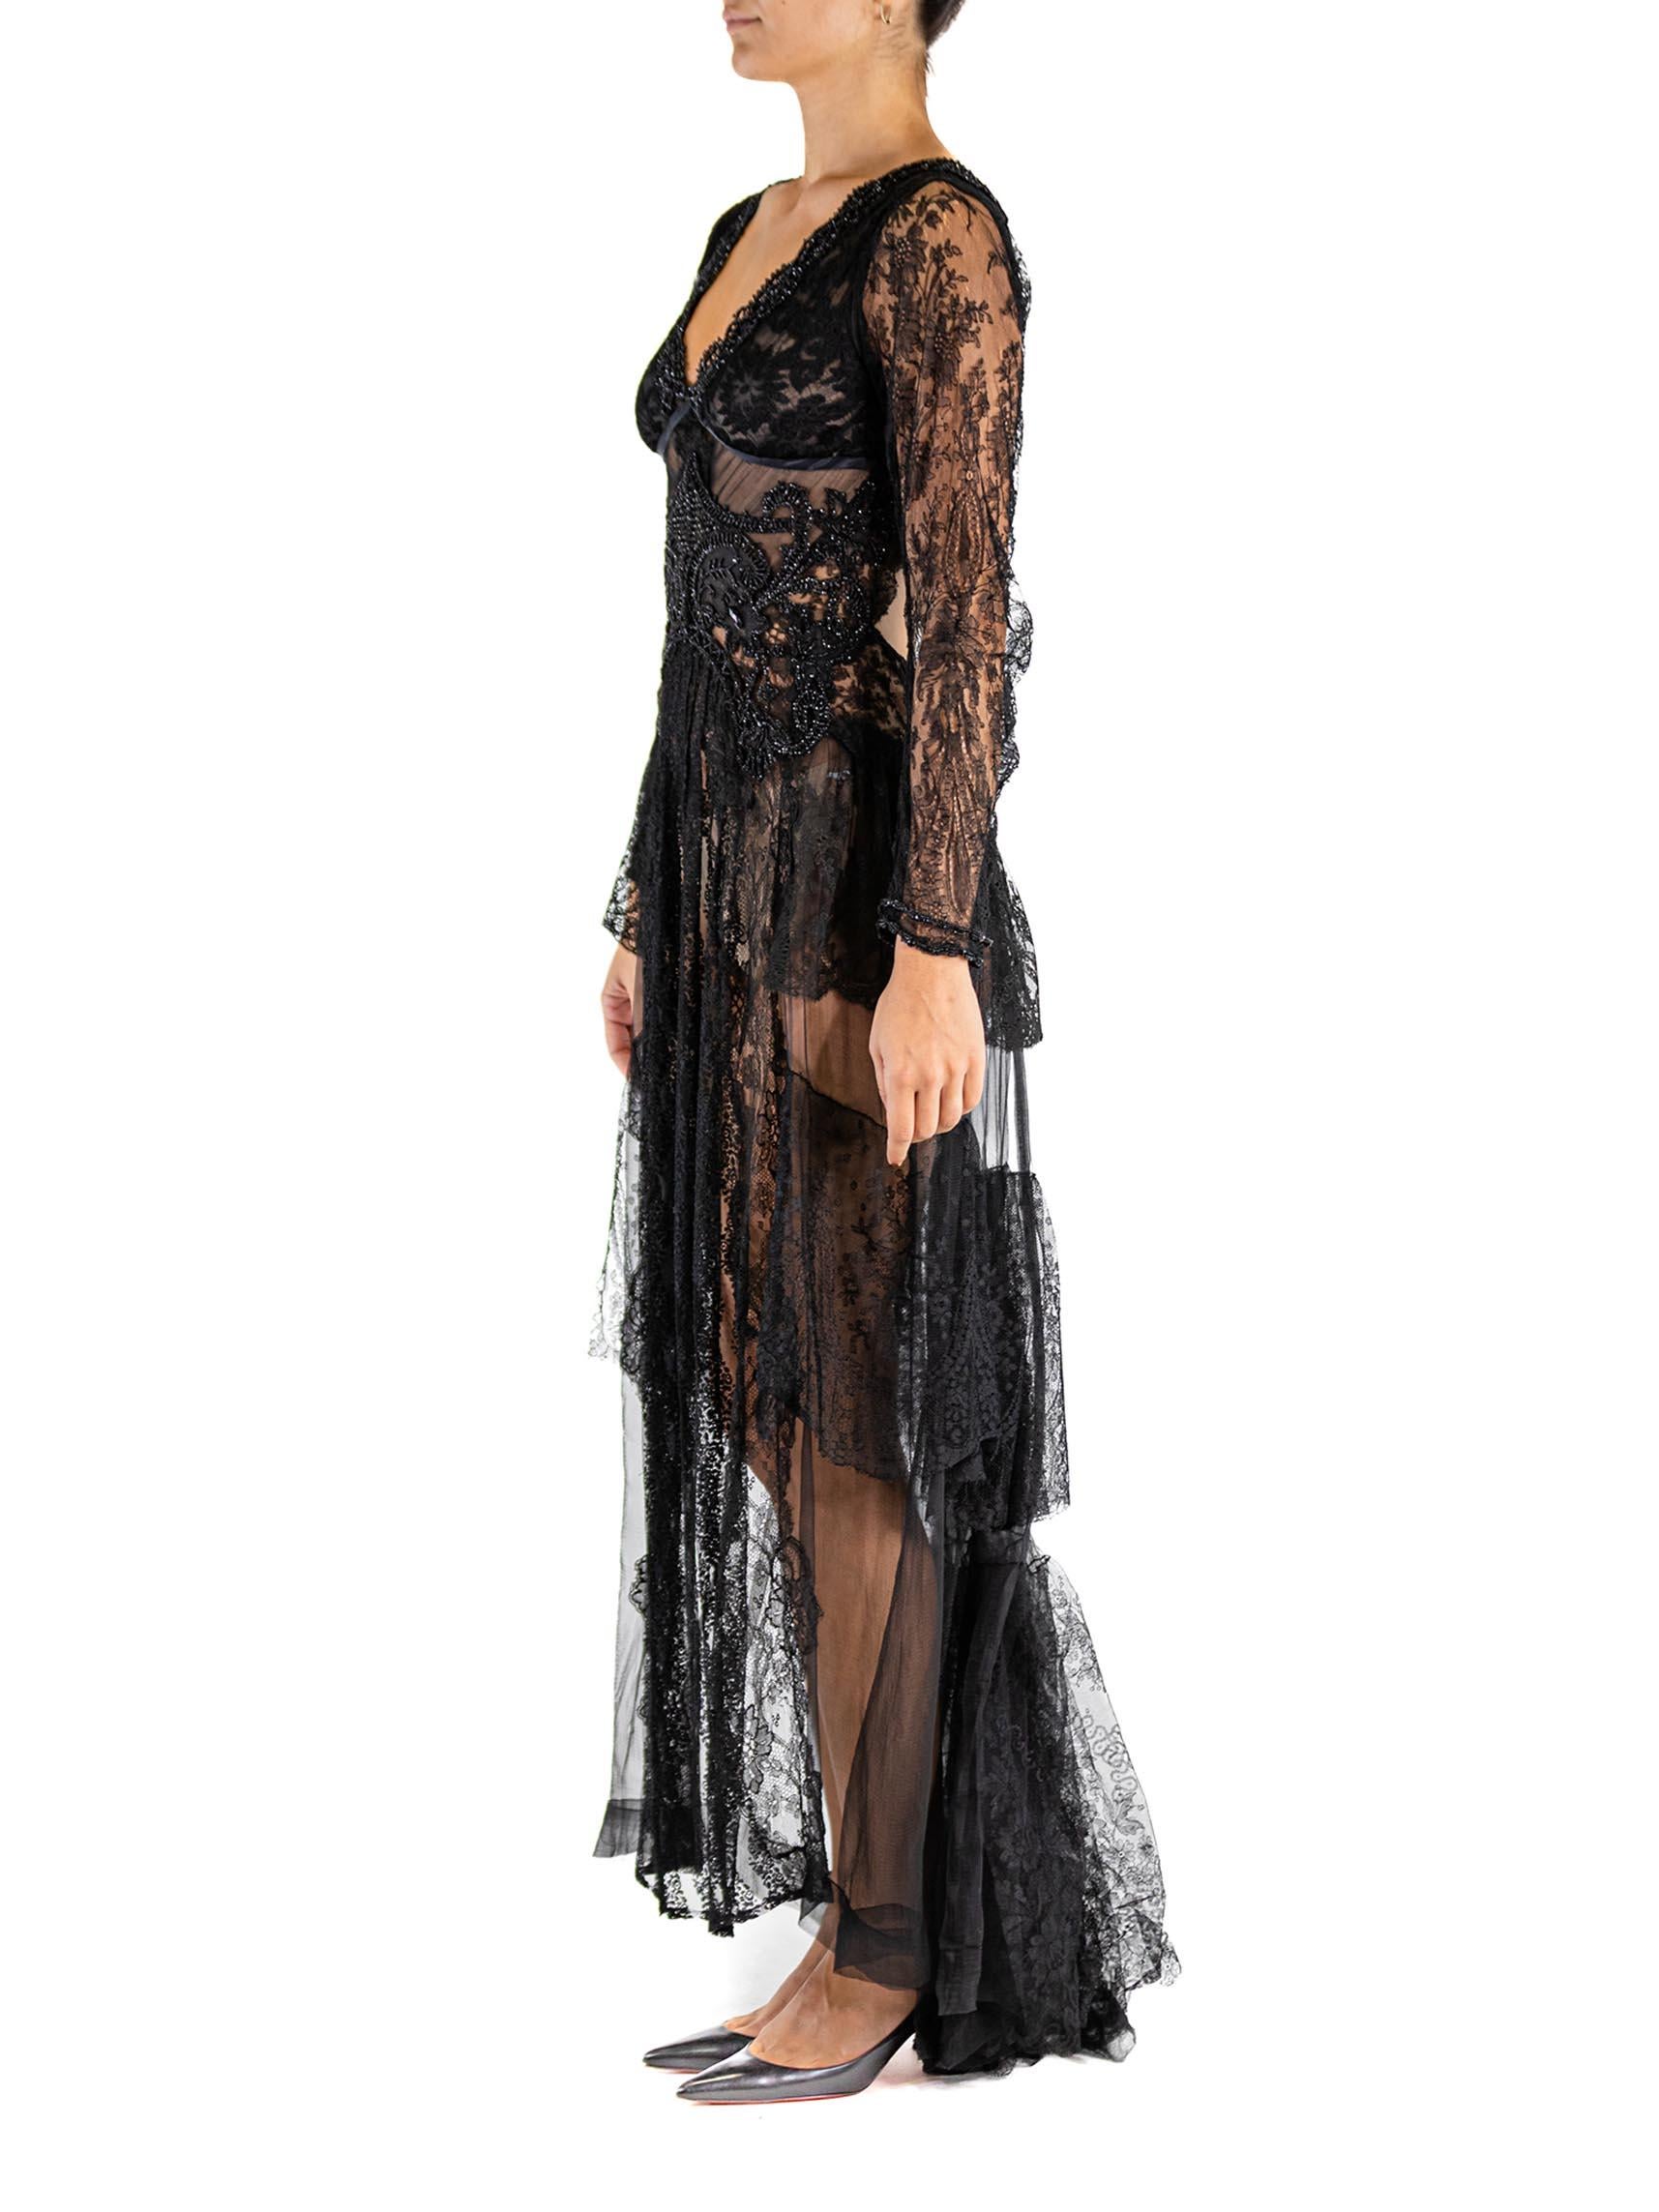 MORPHEW ATELIER Black Antique Lace Victorian Beadwork Gown In Excellent Condition For Sale In New York, NY